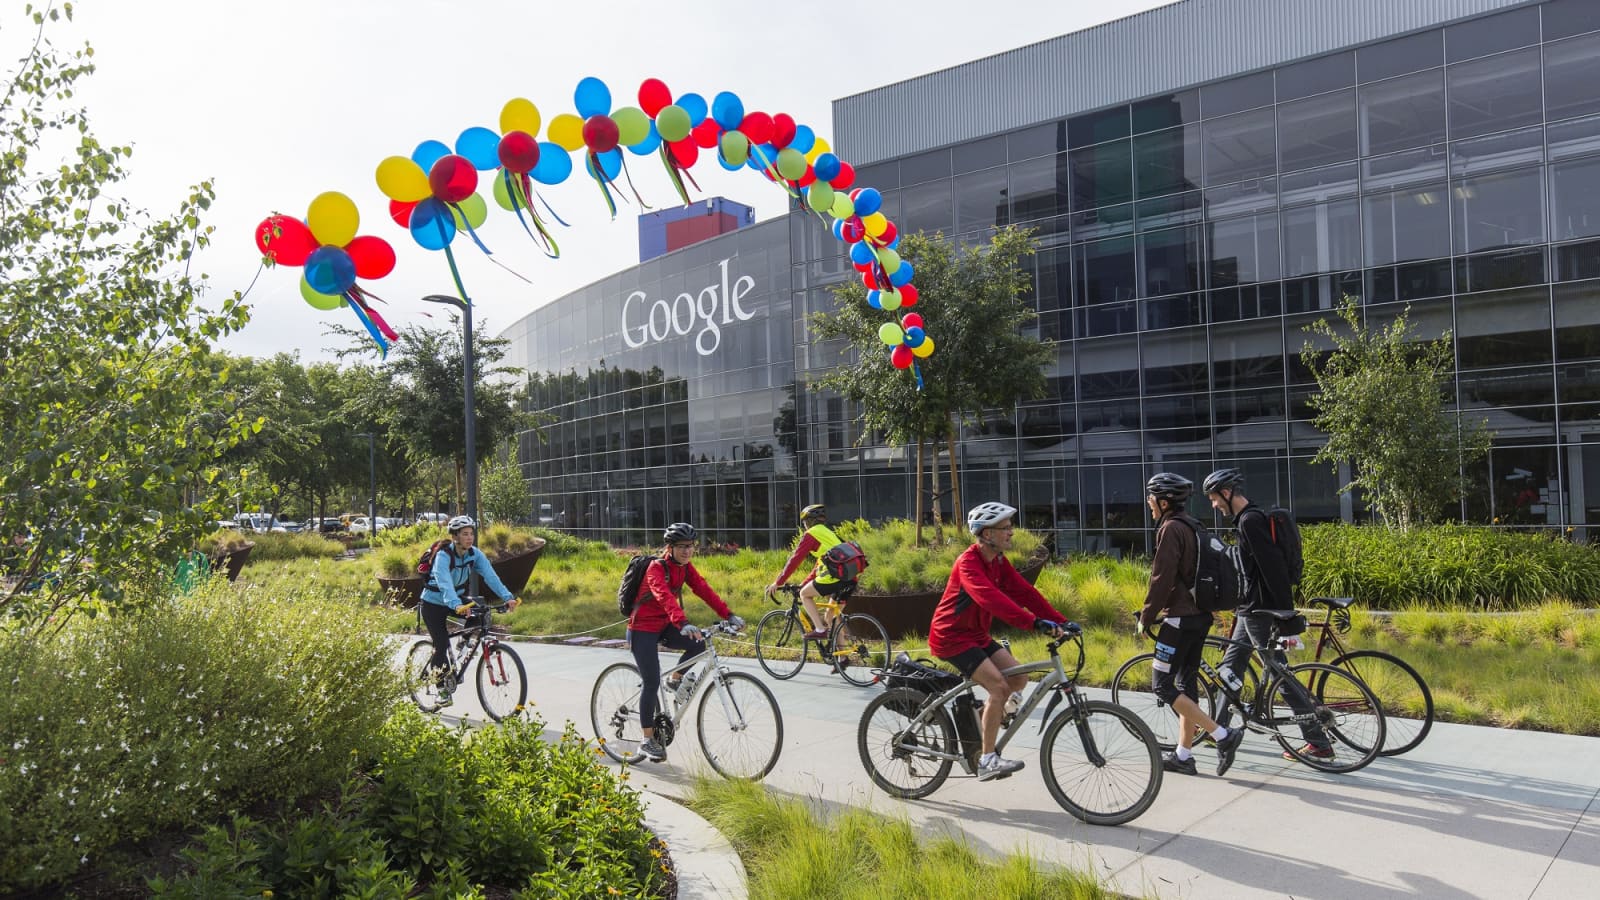 Google spends $20 billion on property in Mountain View